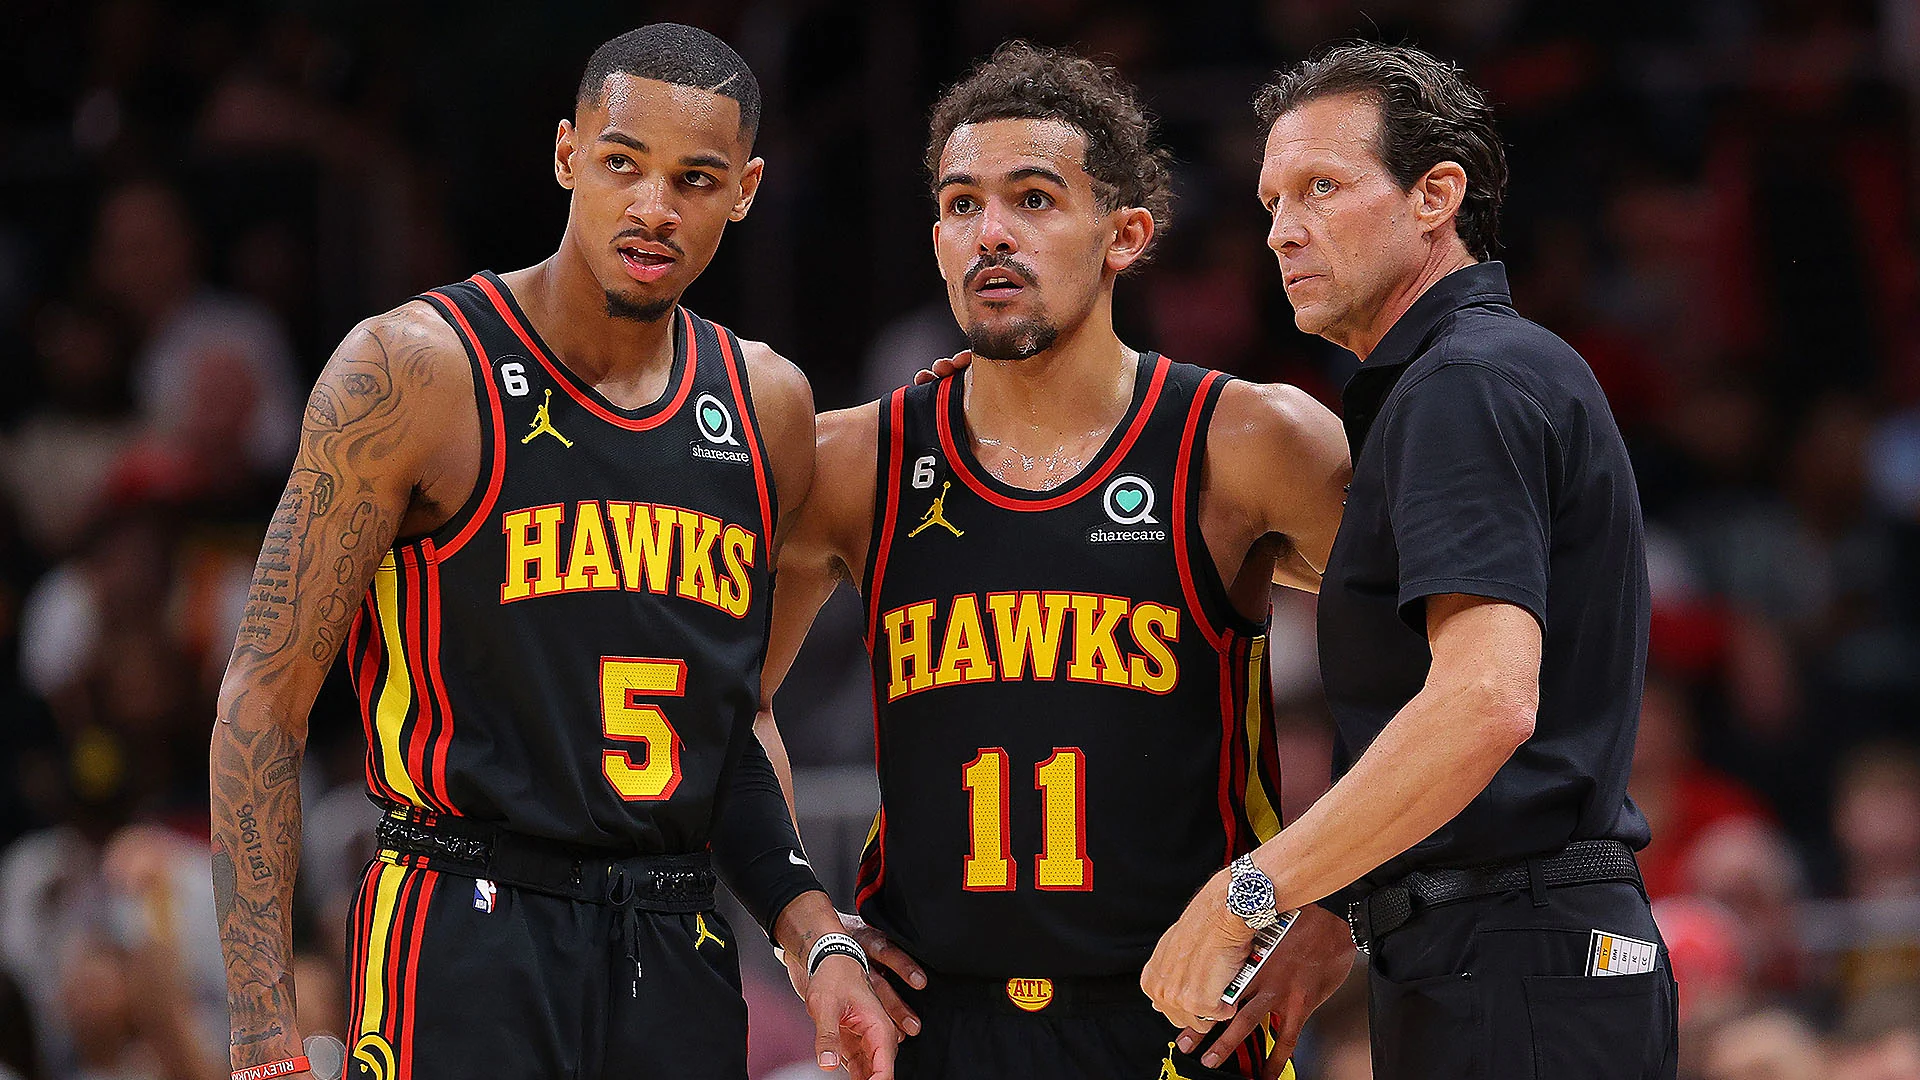 Trae Young The Driving Force Behind Atlanta Hawks' Offensive Surge